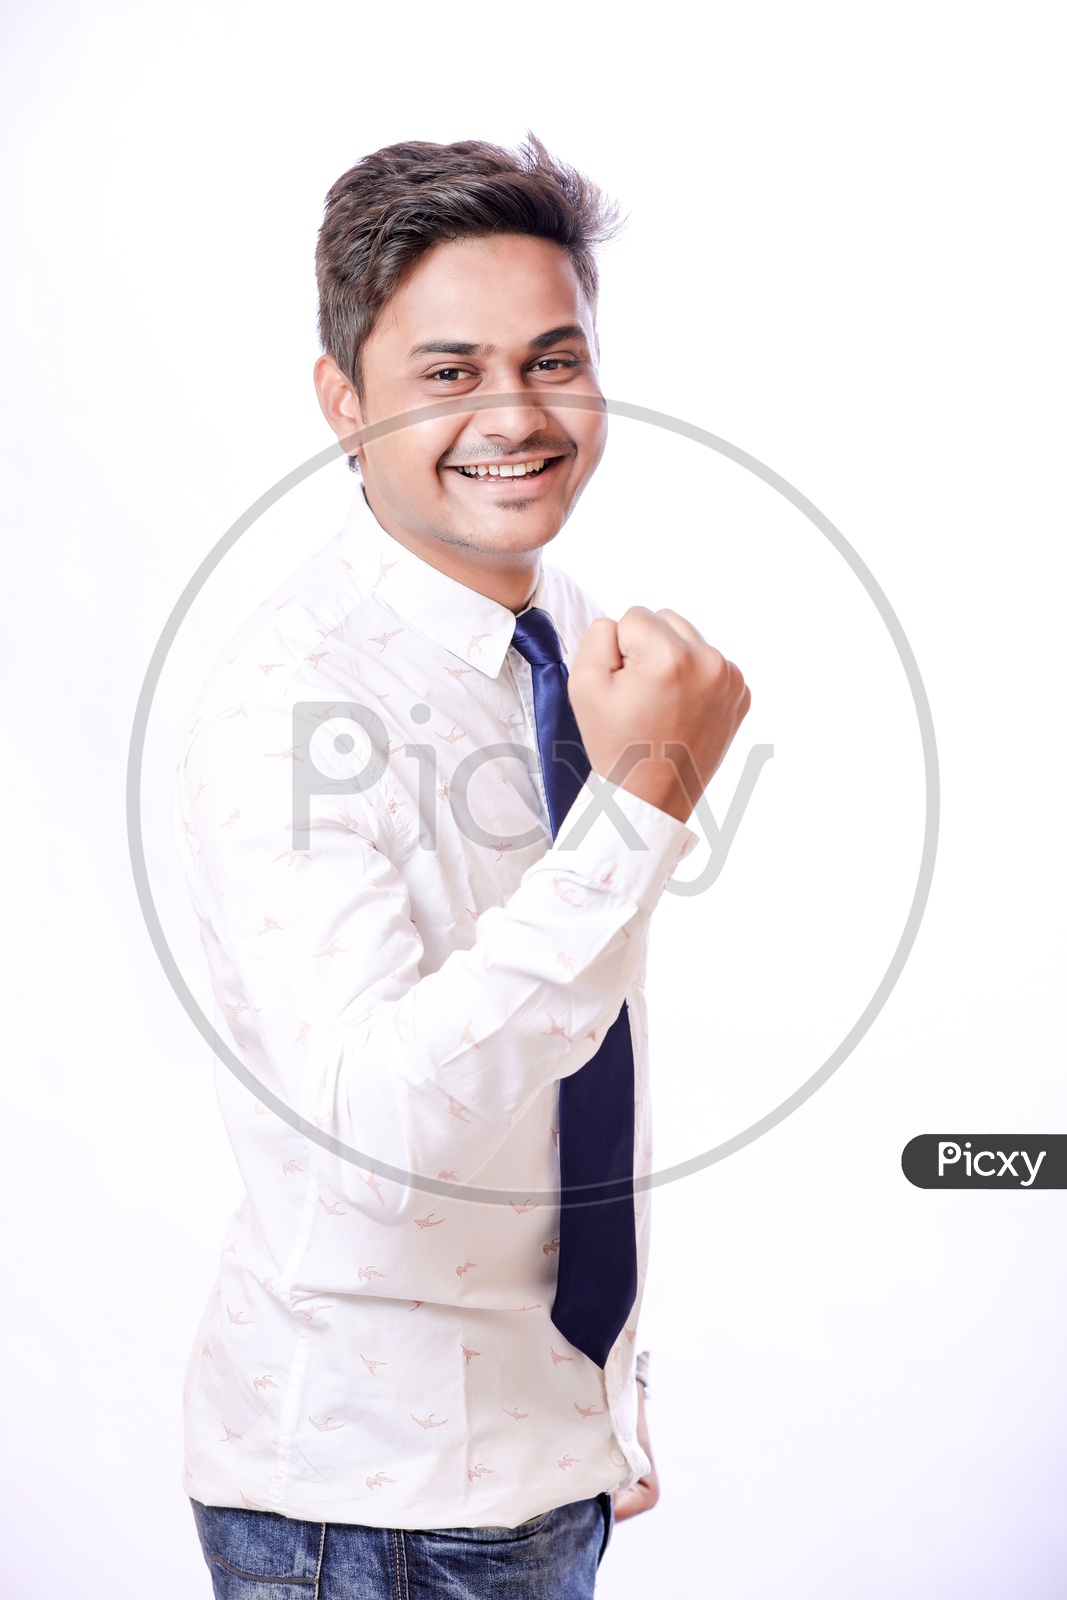 Portrait Of A Confident Young man in Formal wear  With Expression   On An Isolated  White  Background